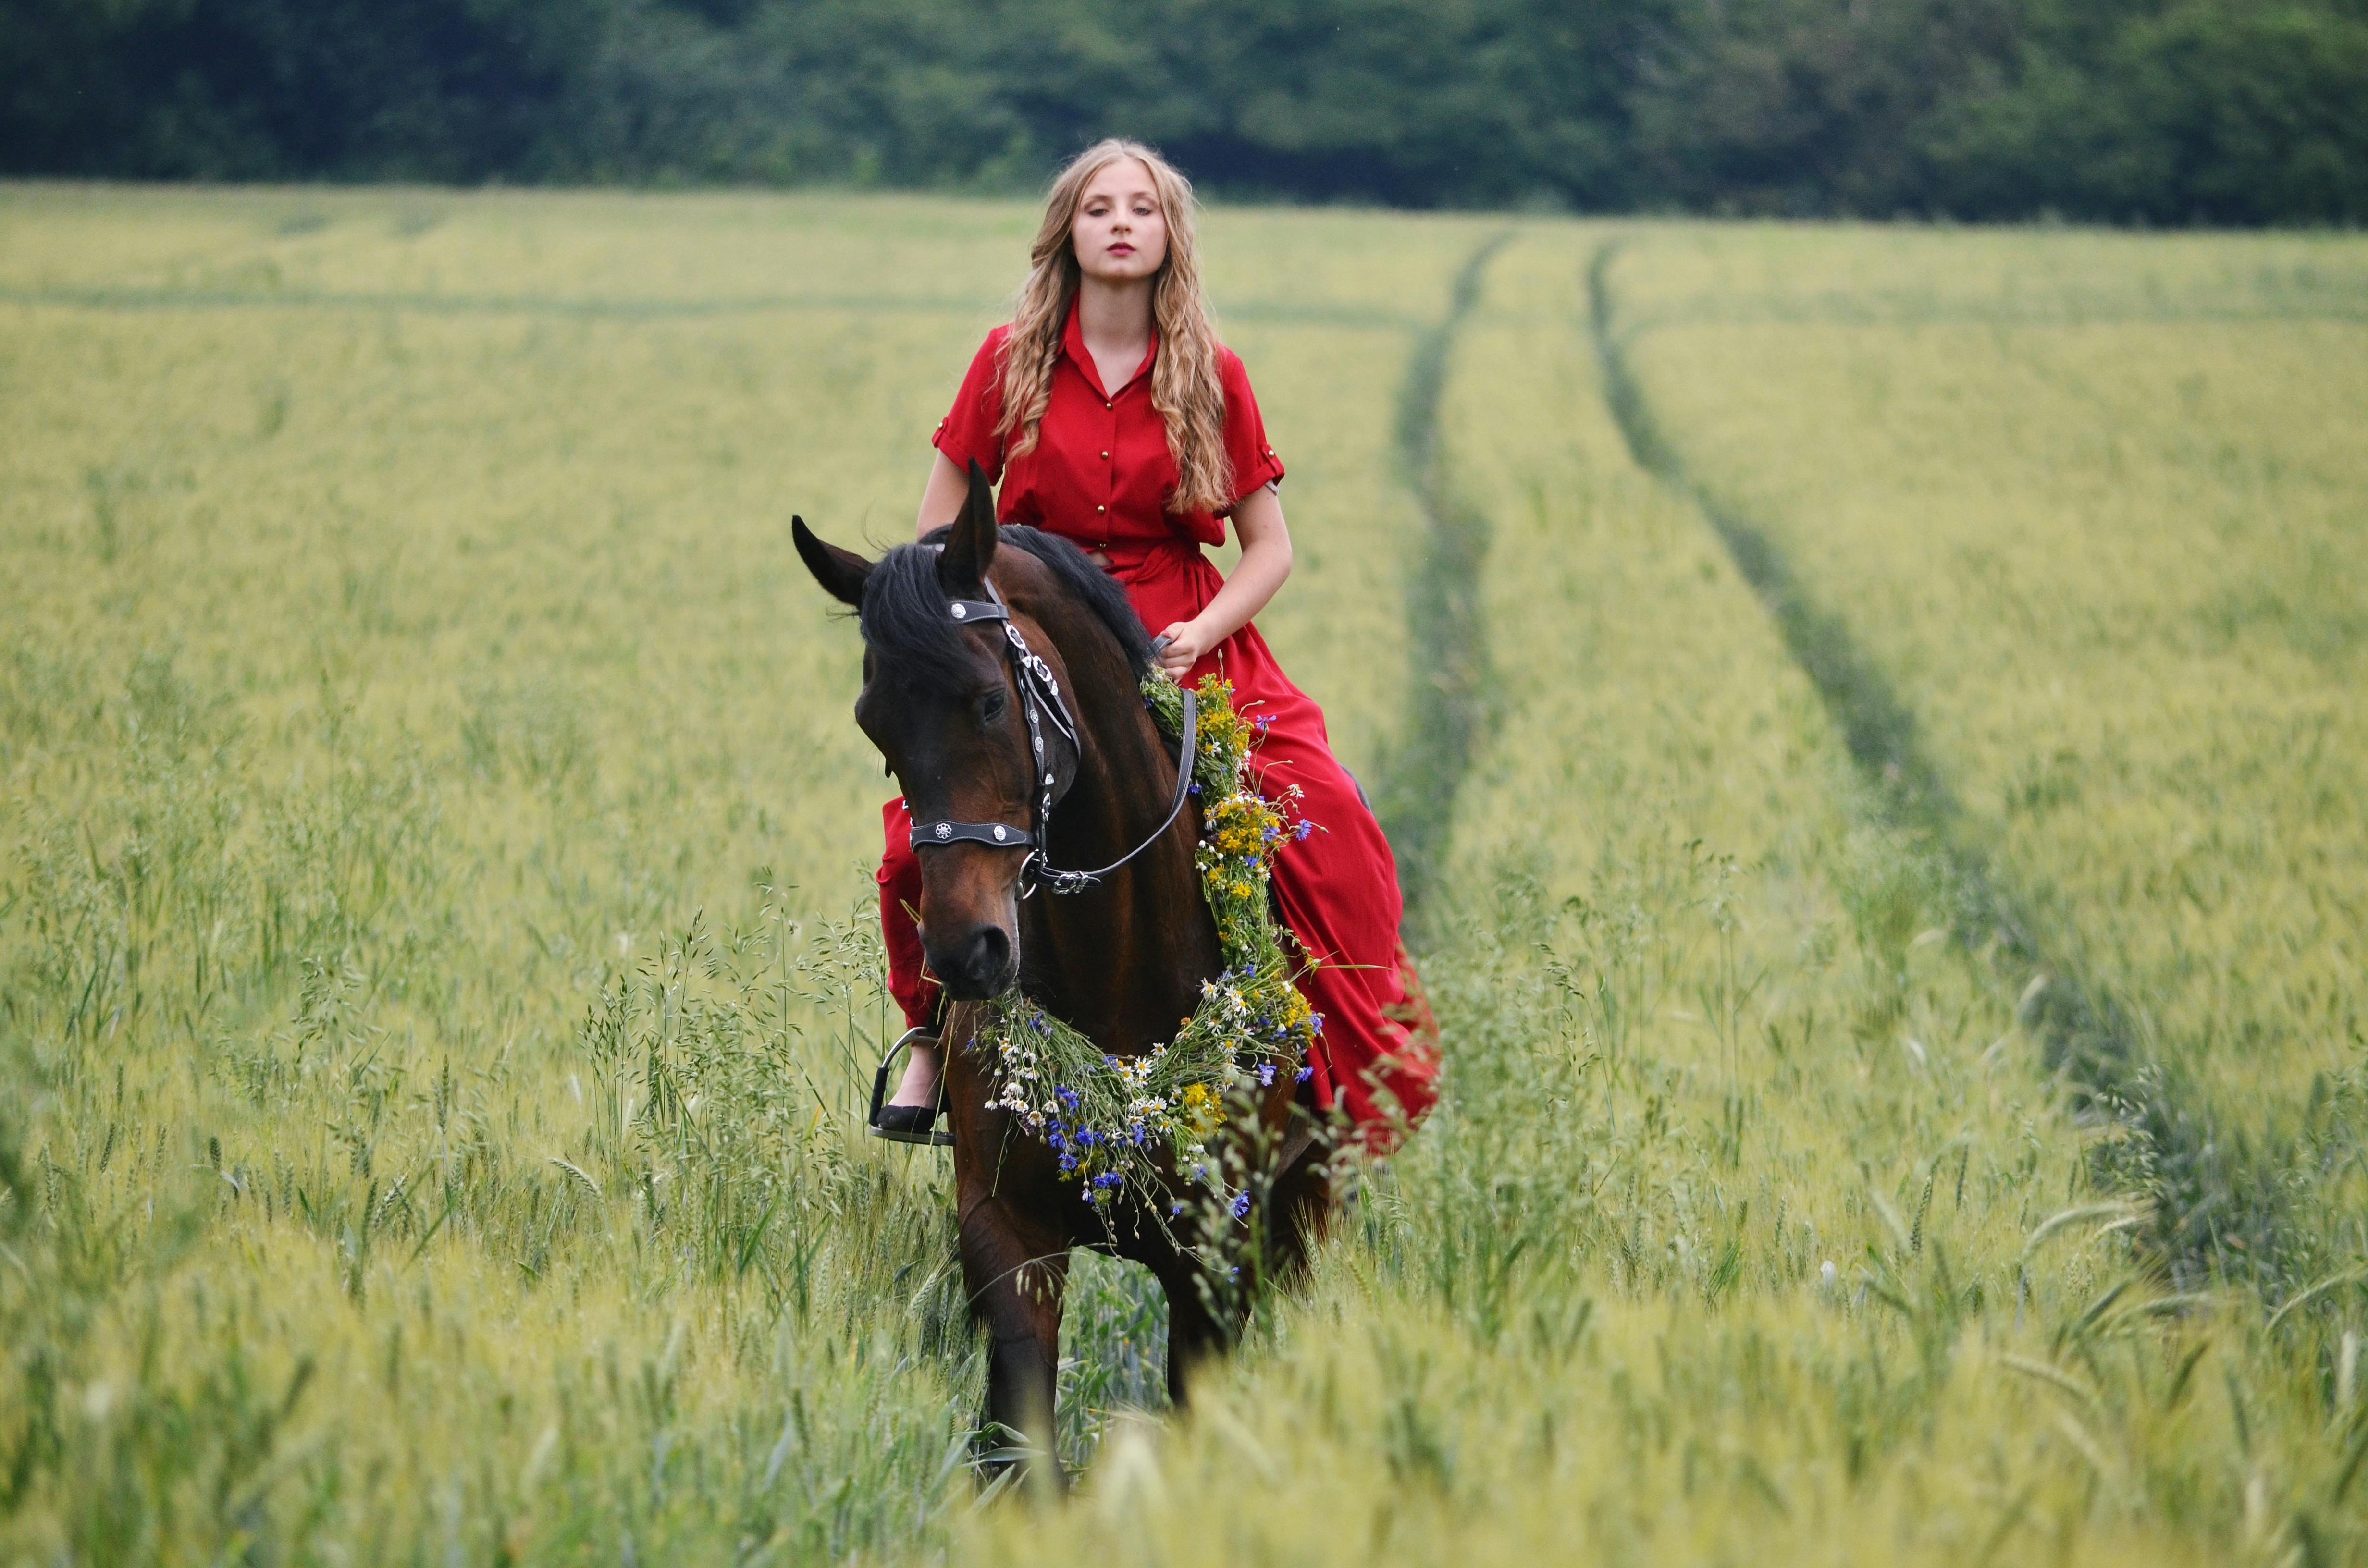 young woman in a red dress riding a horse through the field